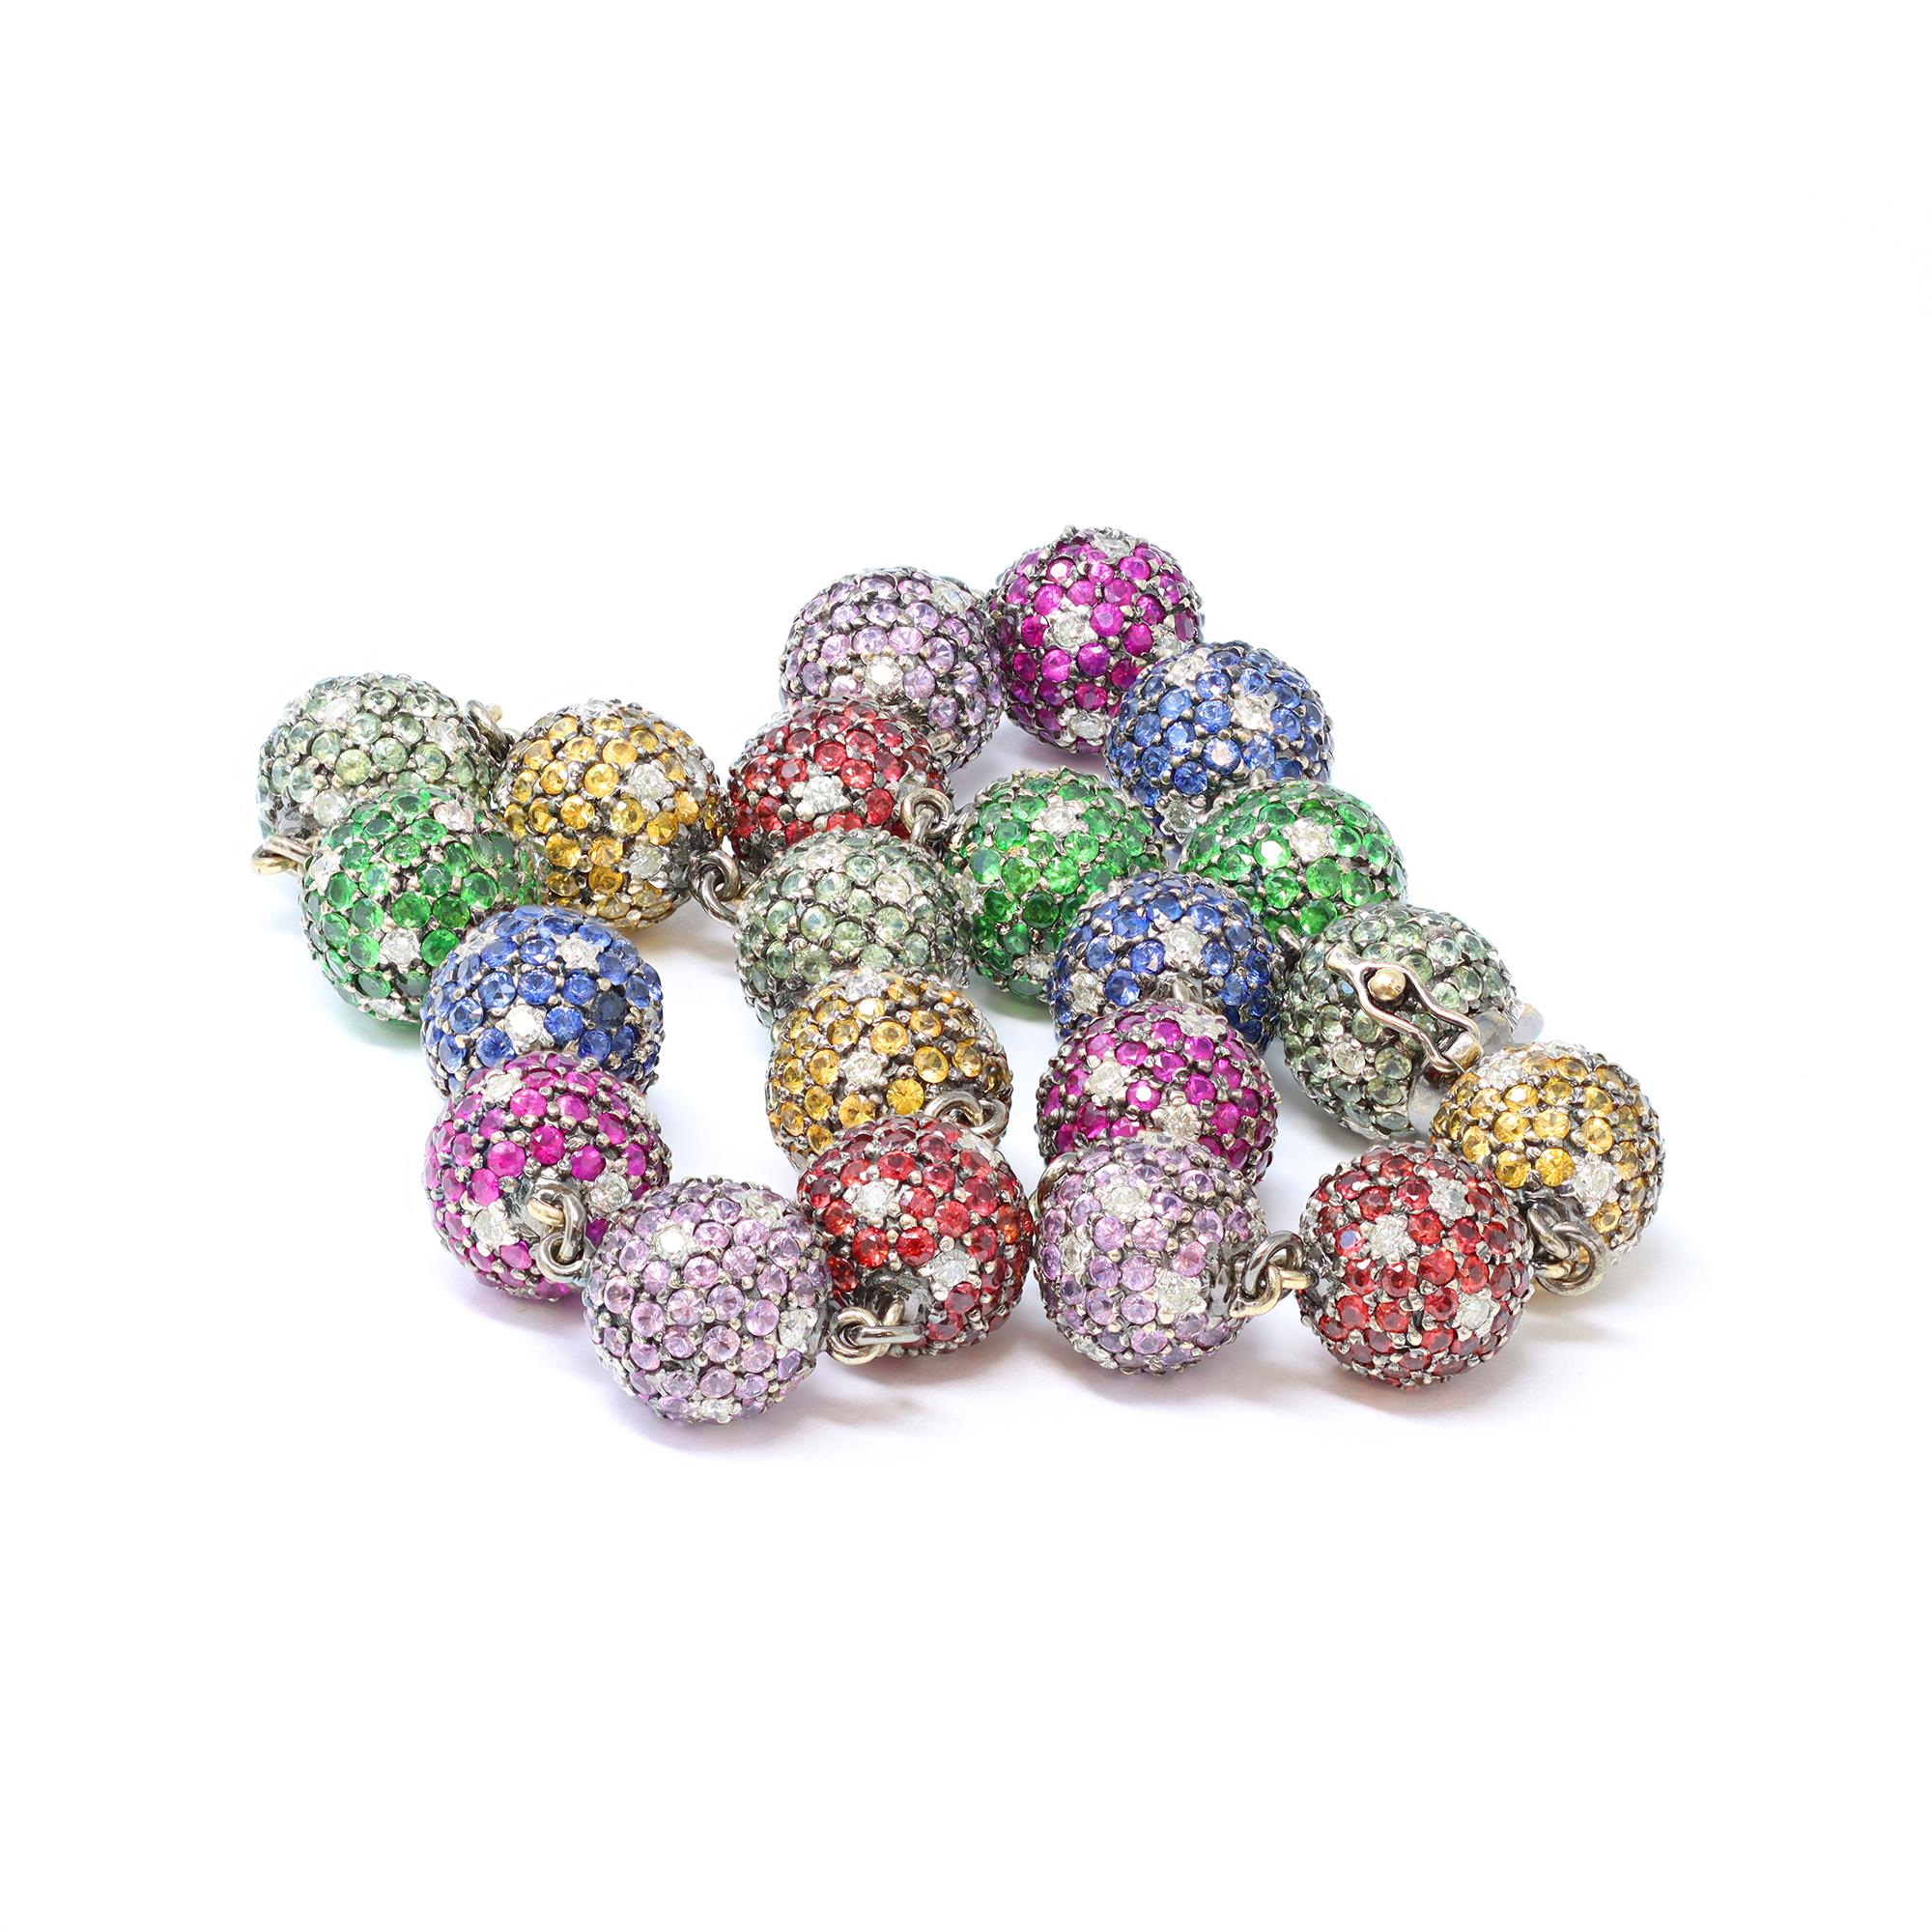 A unique and modern bead necklace featuring multicolor gemstones set in a pave fashion with diamond accents. The necklace has a total of 21 balls including the clasp. Each ball is set with natural stones : Blue sapphires, pink sapphires, rubies,